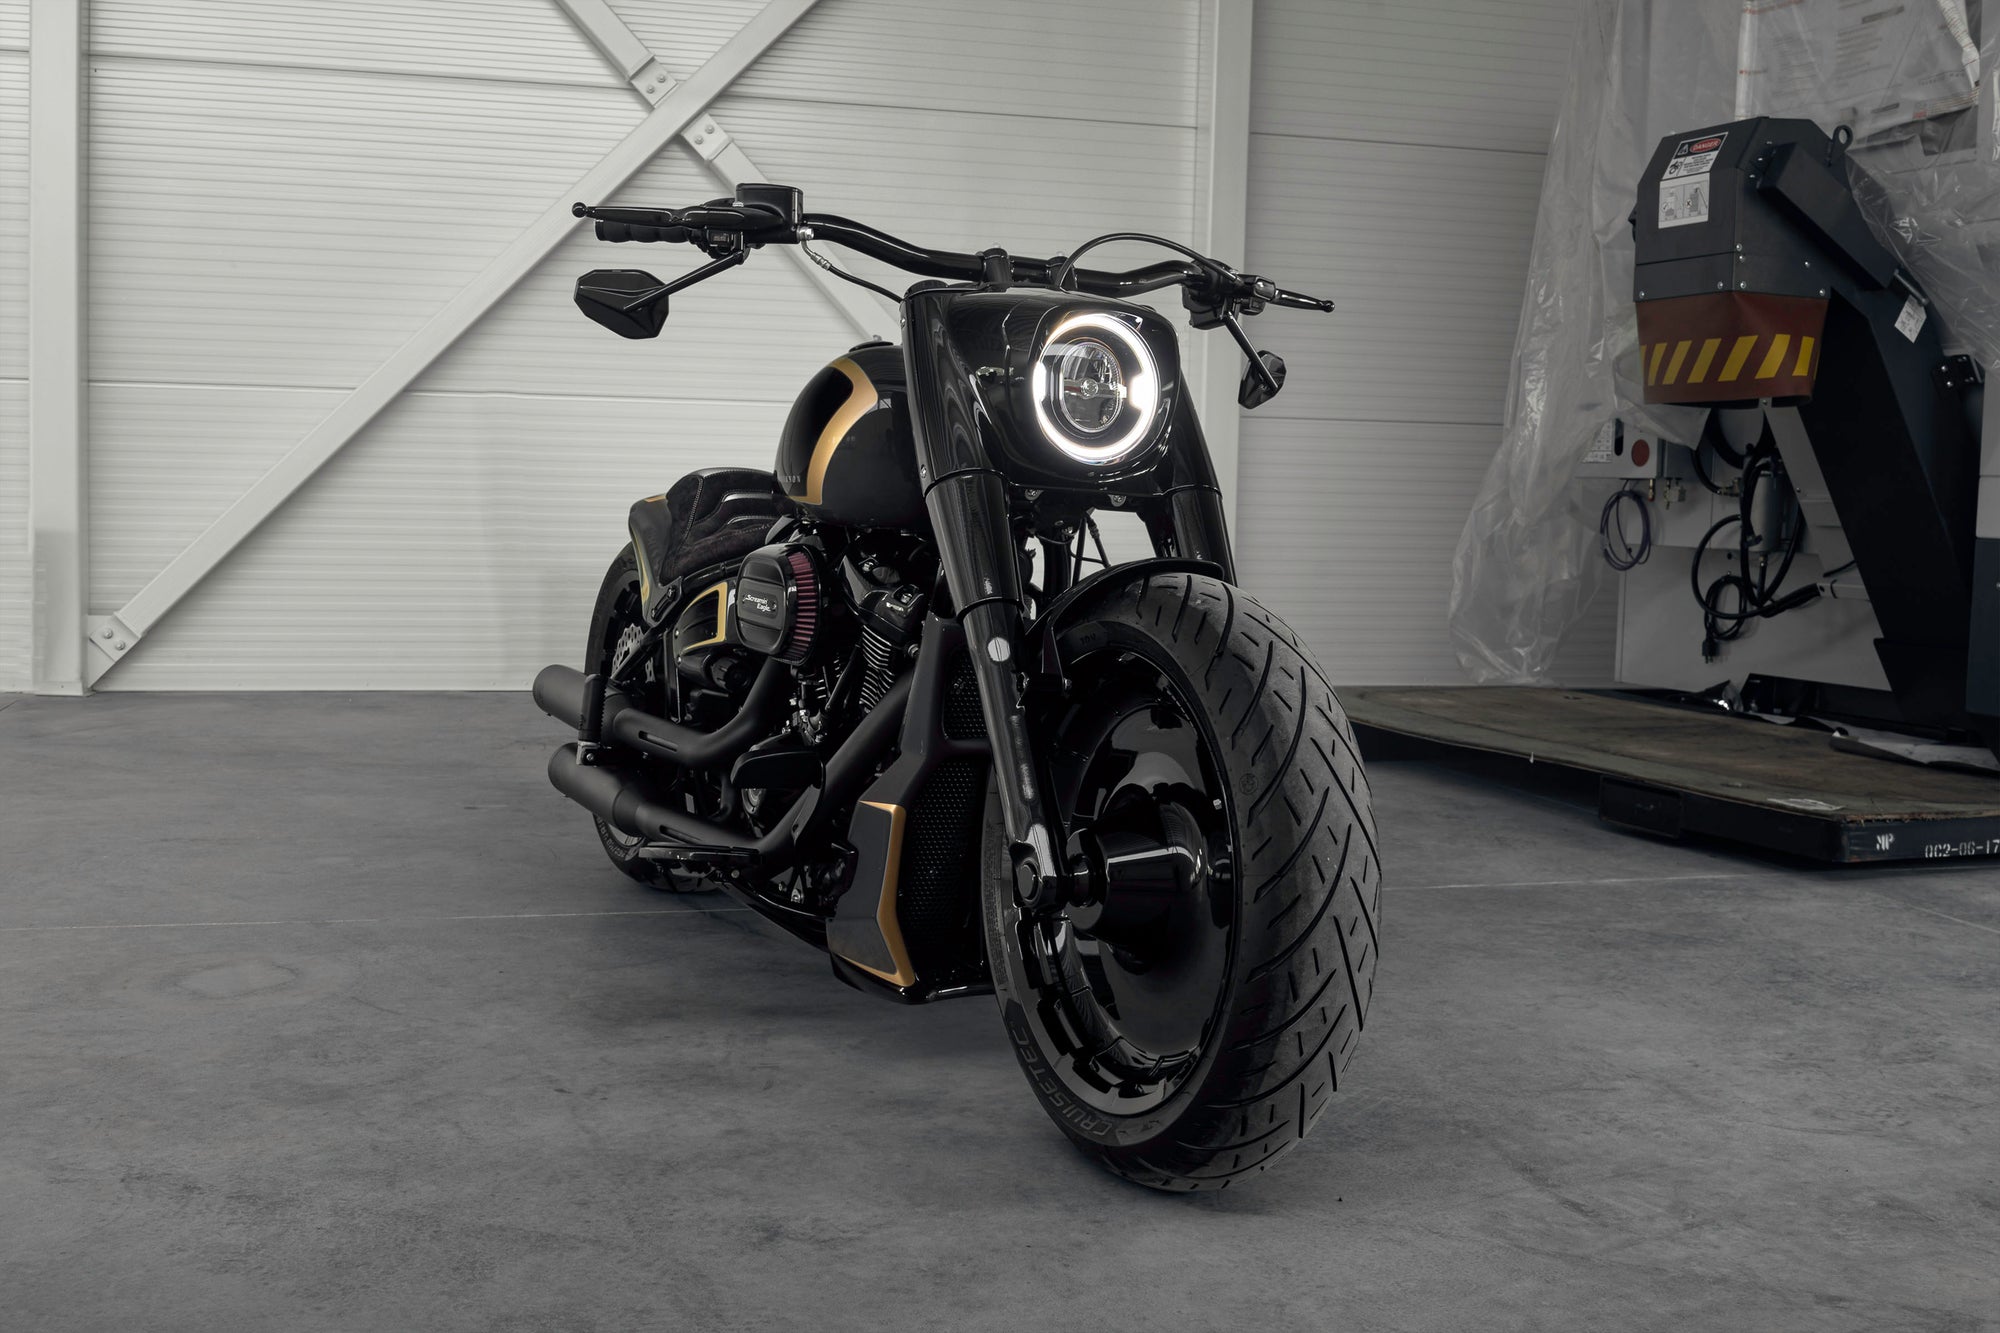 Modified Harley Davidson Fat Boy motorcycle with Killer Custom parts from the front in a modern garage